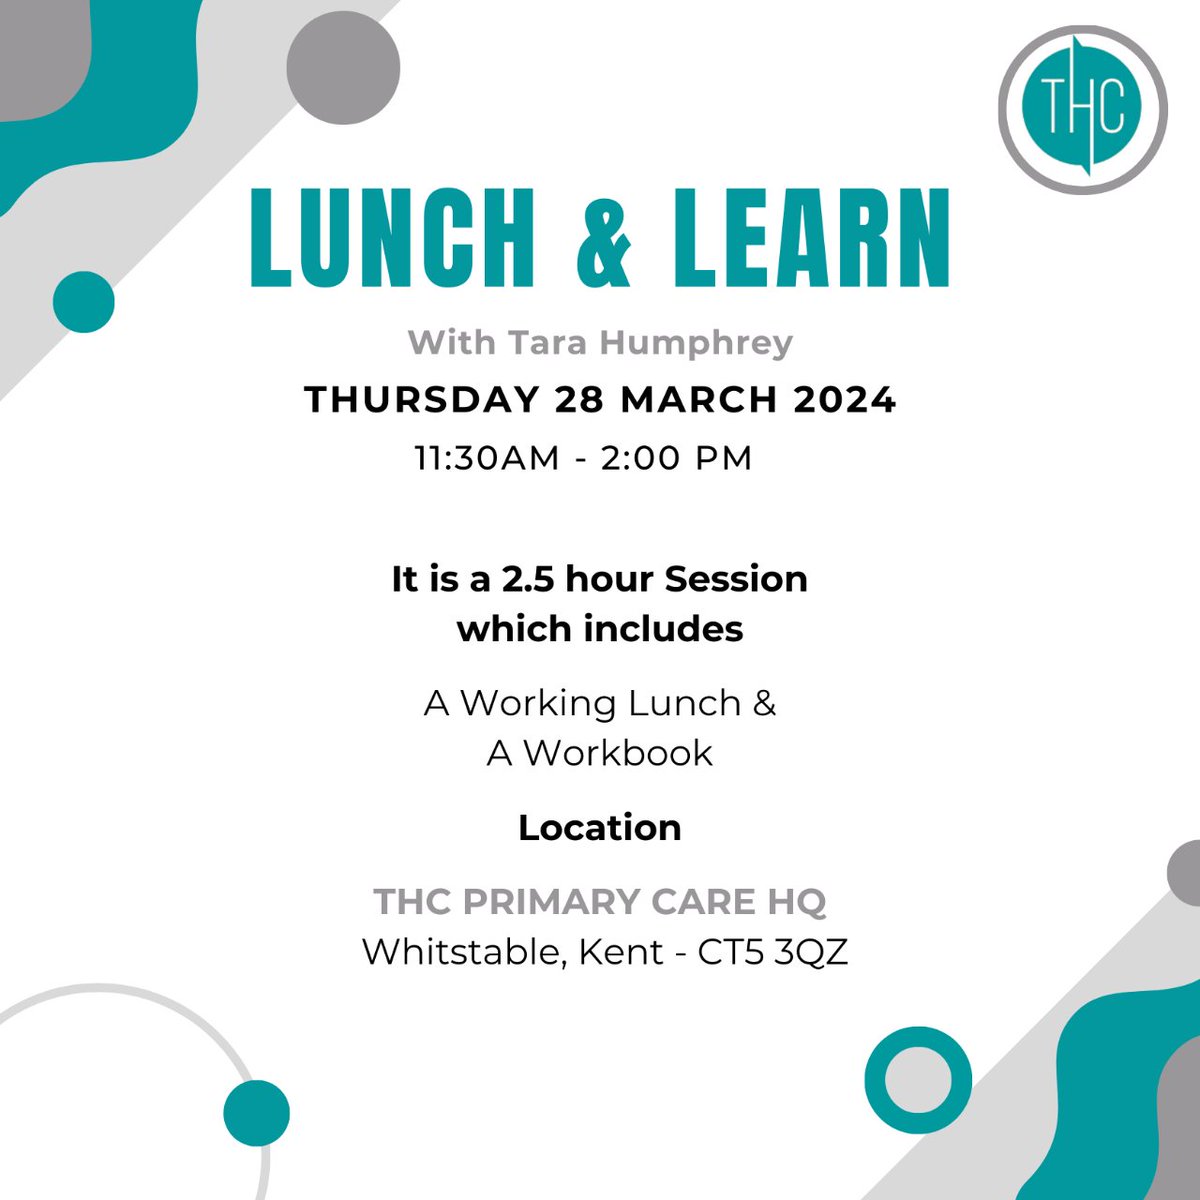 Are you part of a #PCN Management team looking to increase your engagement? We have a lunch & learn session available in March at our HQ in Whitstable, Kent. To find out more & reserve your place - please do check out our page below 🤗 thcprimarycare.co.uk/lunch-and-learn #primarycarenetwork